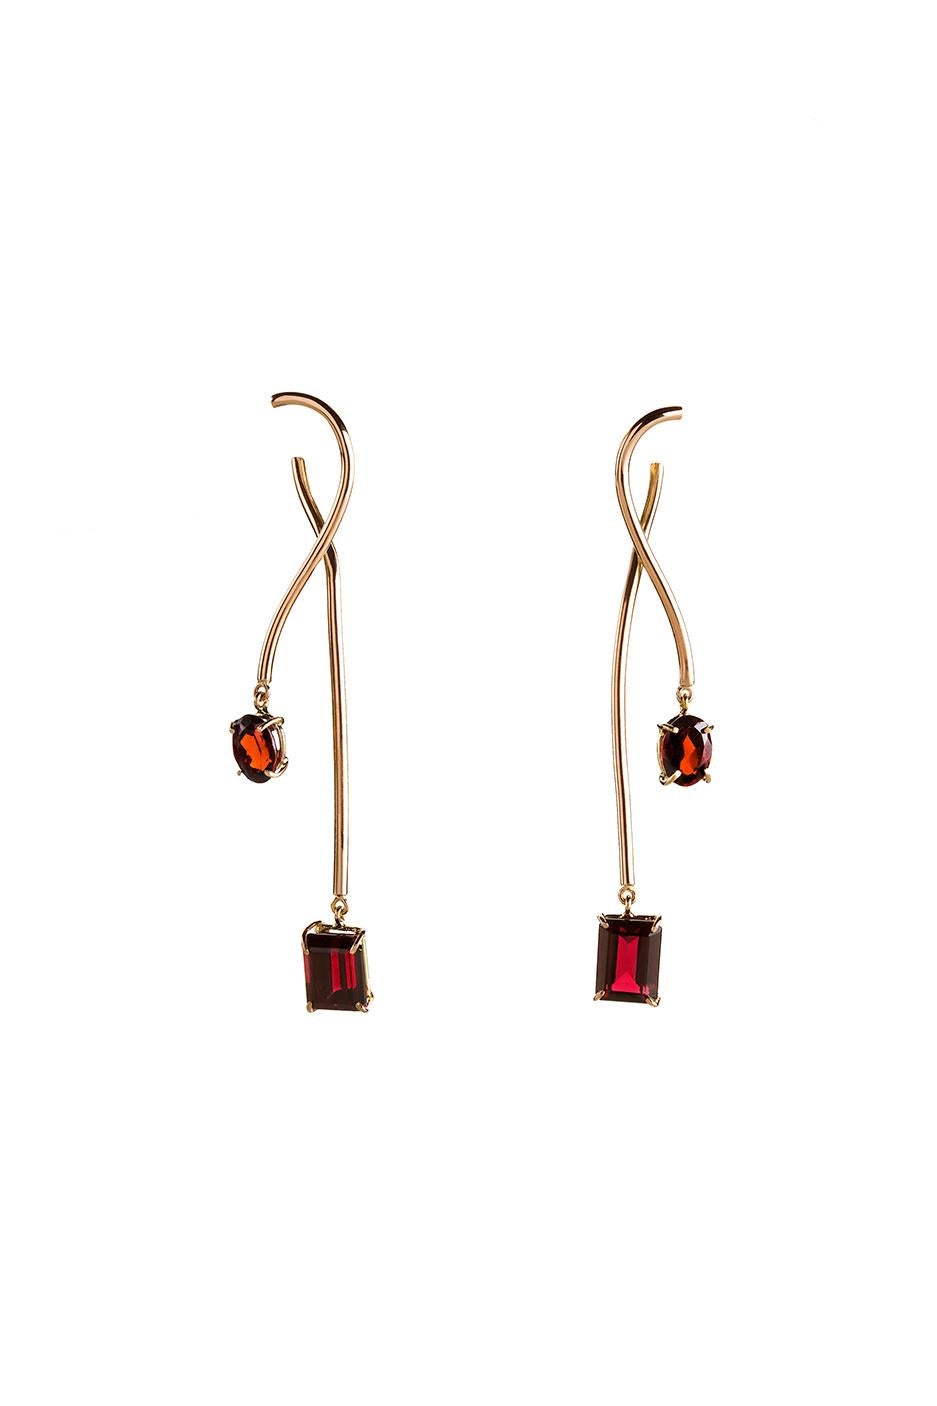 Contemporary 18 Karats Rose Gold Red Garnet Design Dangle Earrings 
The “Villa Borghese Fall” earrings are made of 18K rose gold and embellished with red garnets.
This piece is entirely produced, in an artisanal way, in Rome, Italy and each phase of